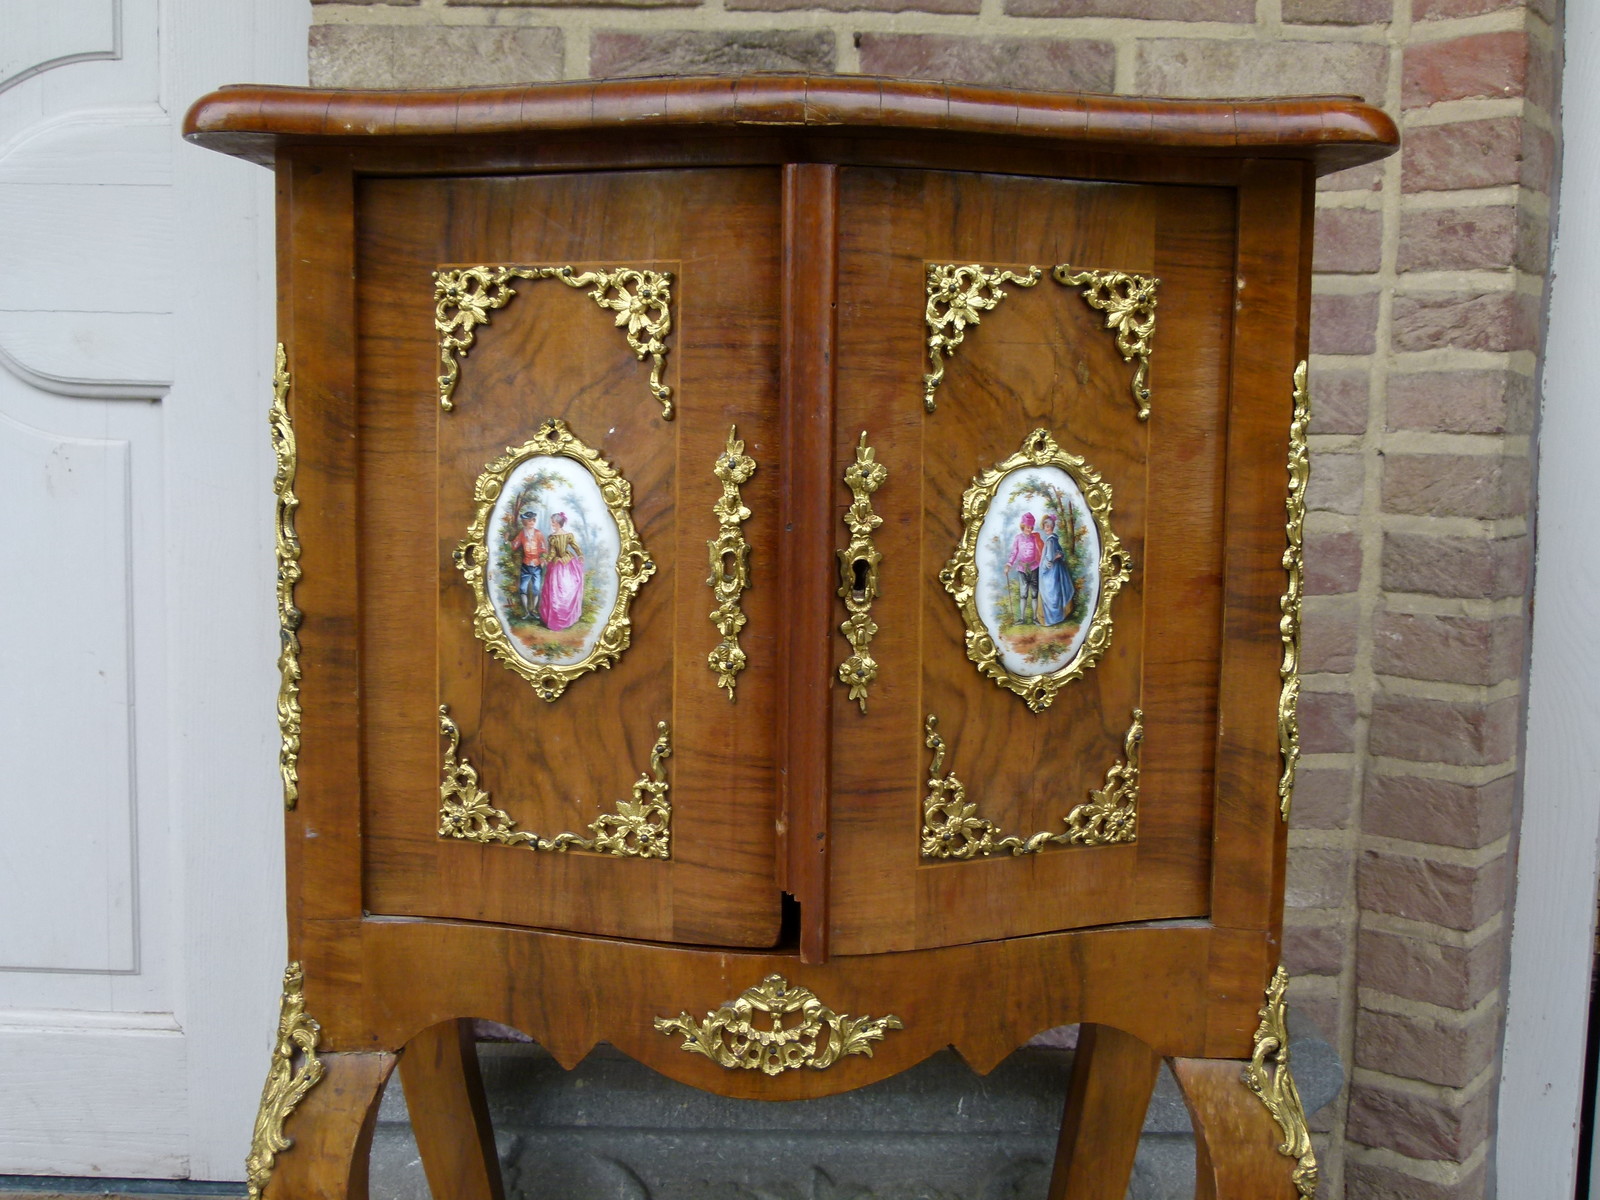 Barock Dresden cabinet with gilded bronze and German porcelain plates